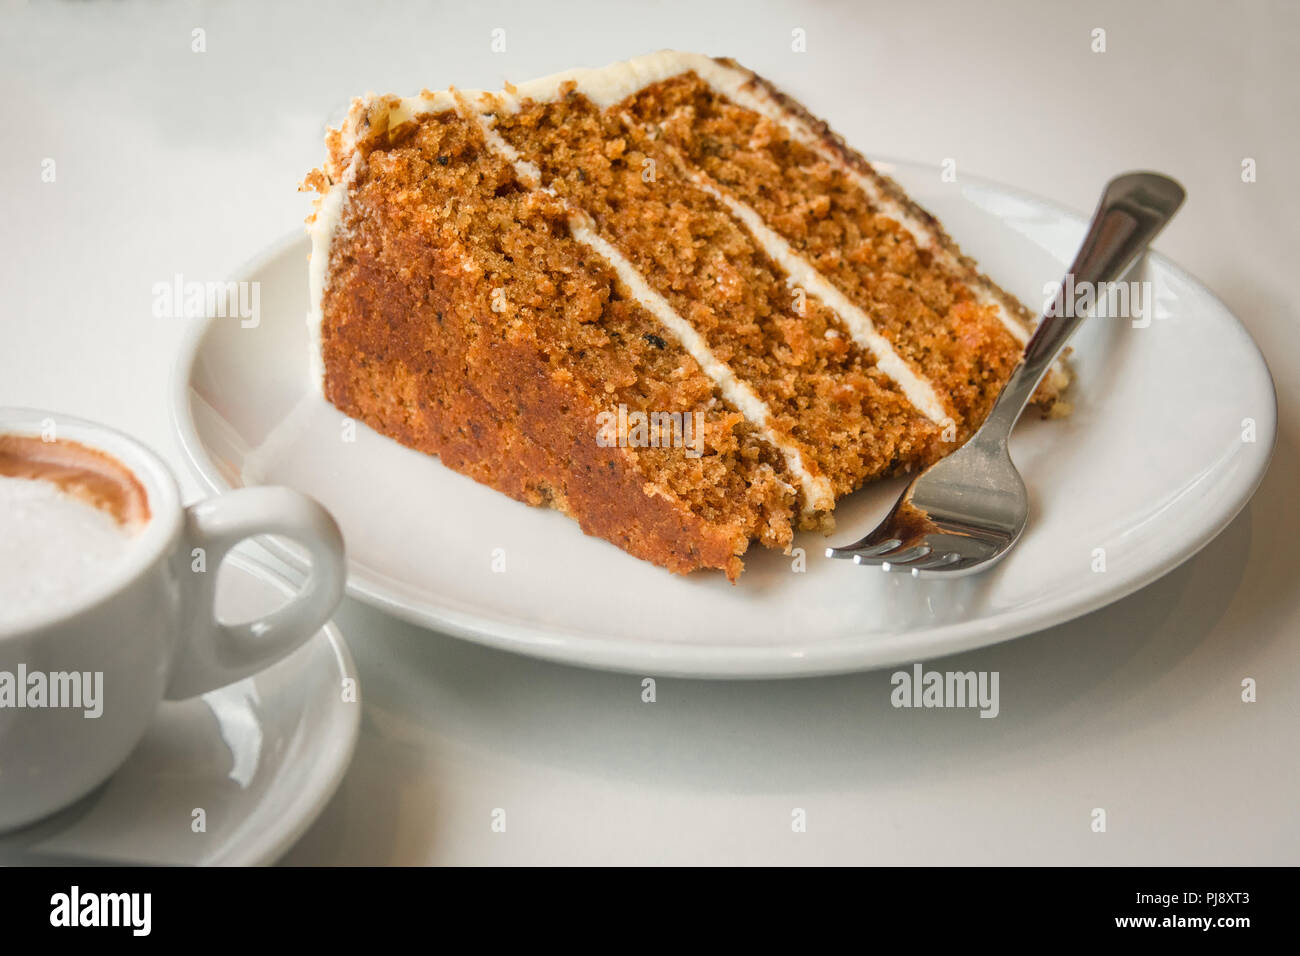 A Slice of Moist and Delicious Carrot Cake With a Cup of Coffee on the Side Stock Photo